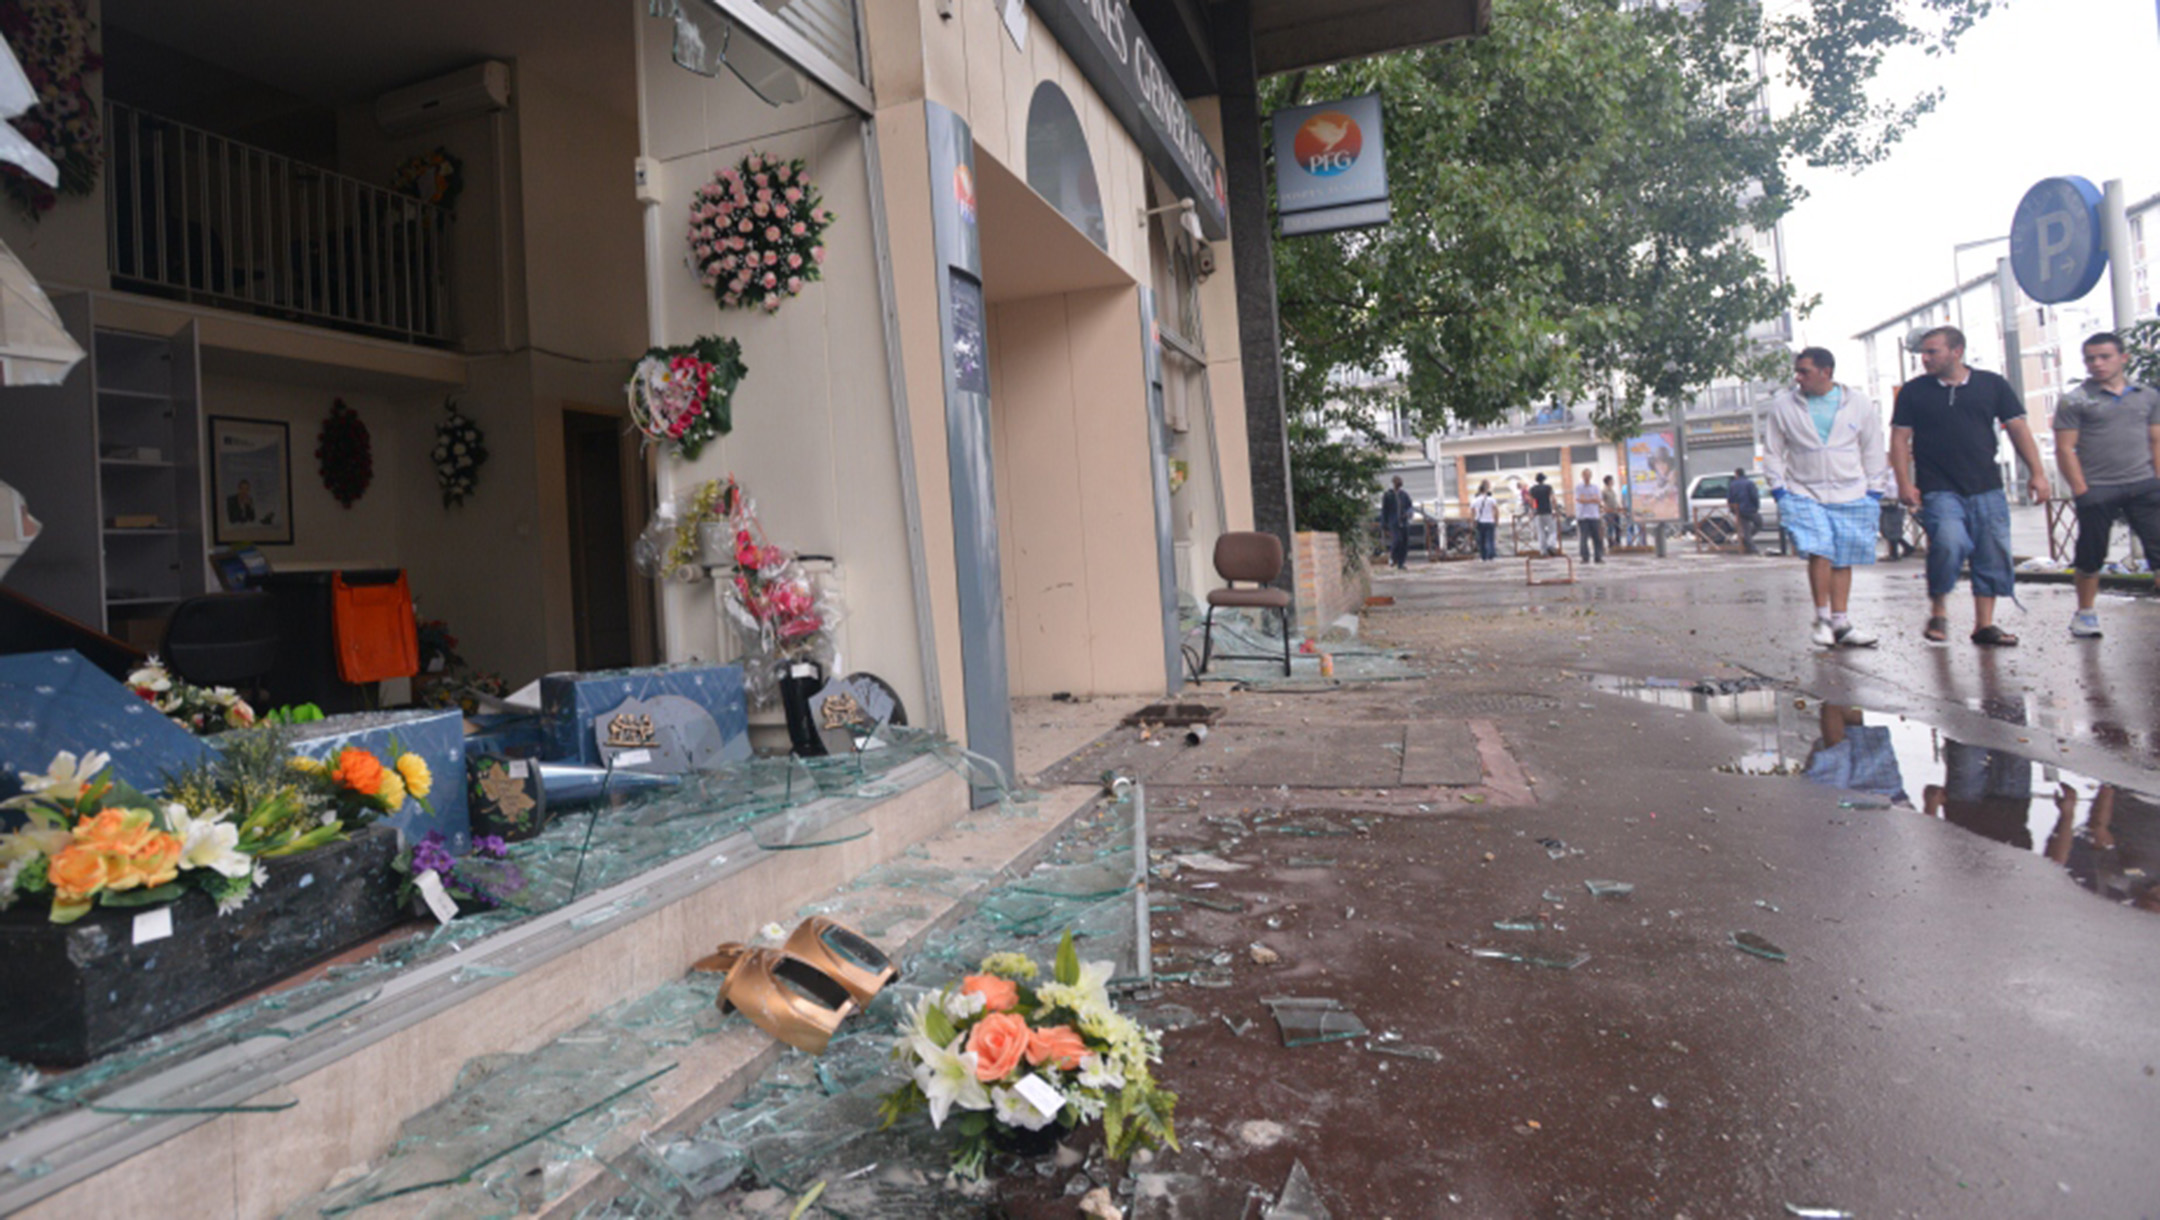 In the Paris suburb of Sarcelles, pro-Palestinian rioters broke shop windows and set fires on July 20, 2014. (Cnaan Liphshiz)